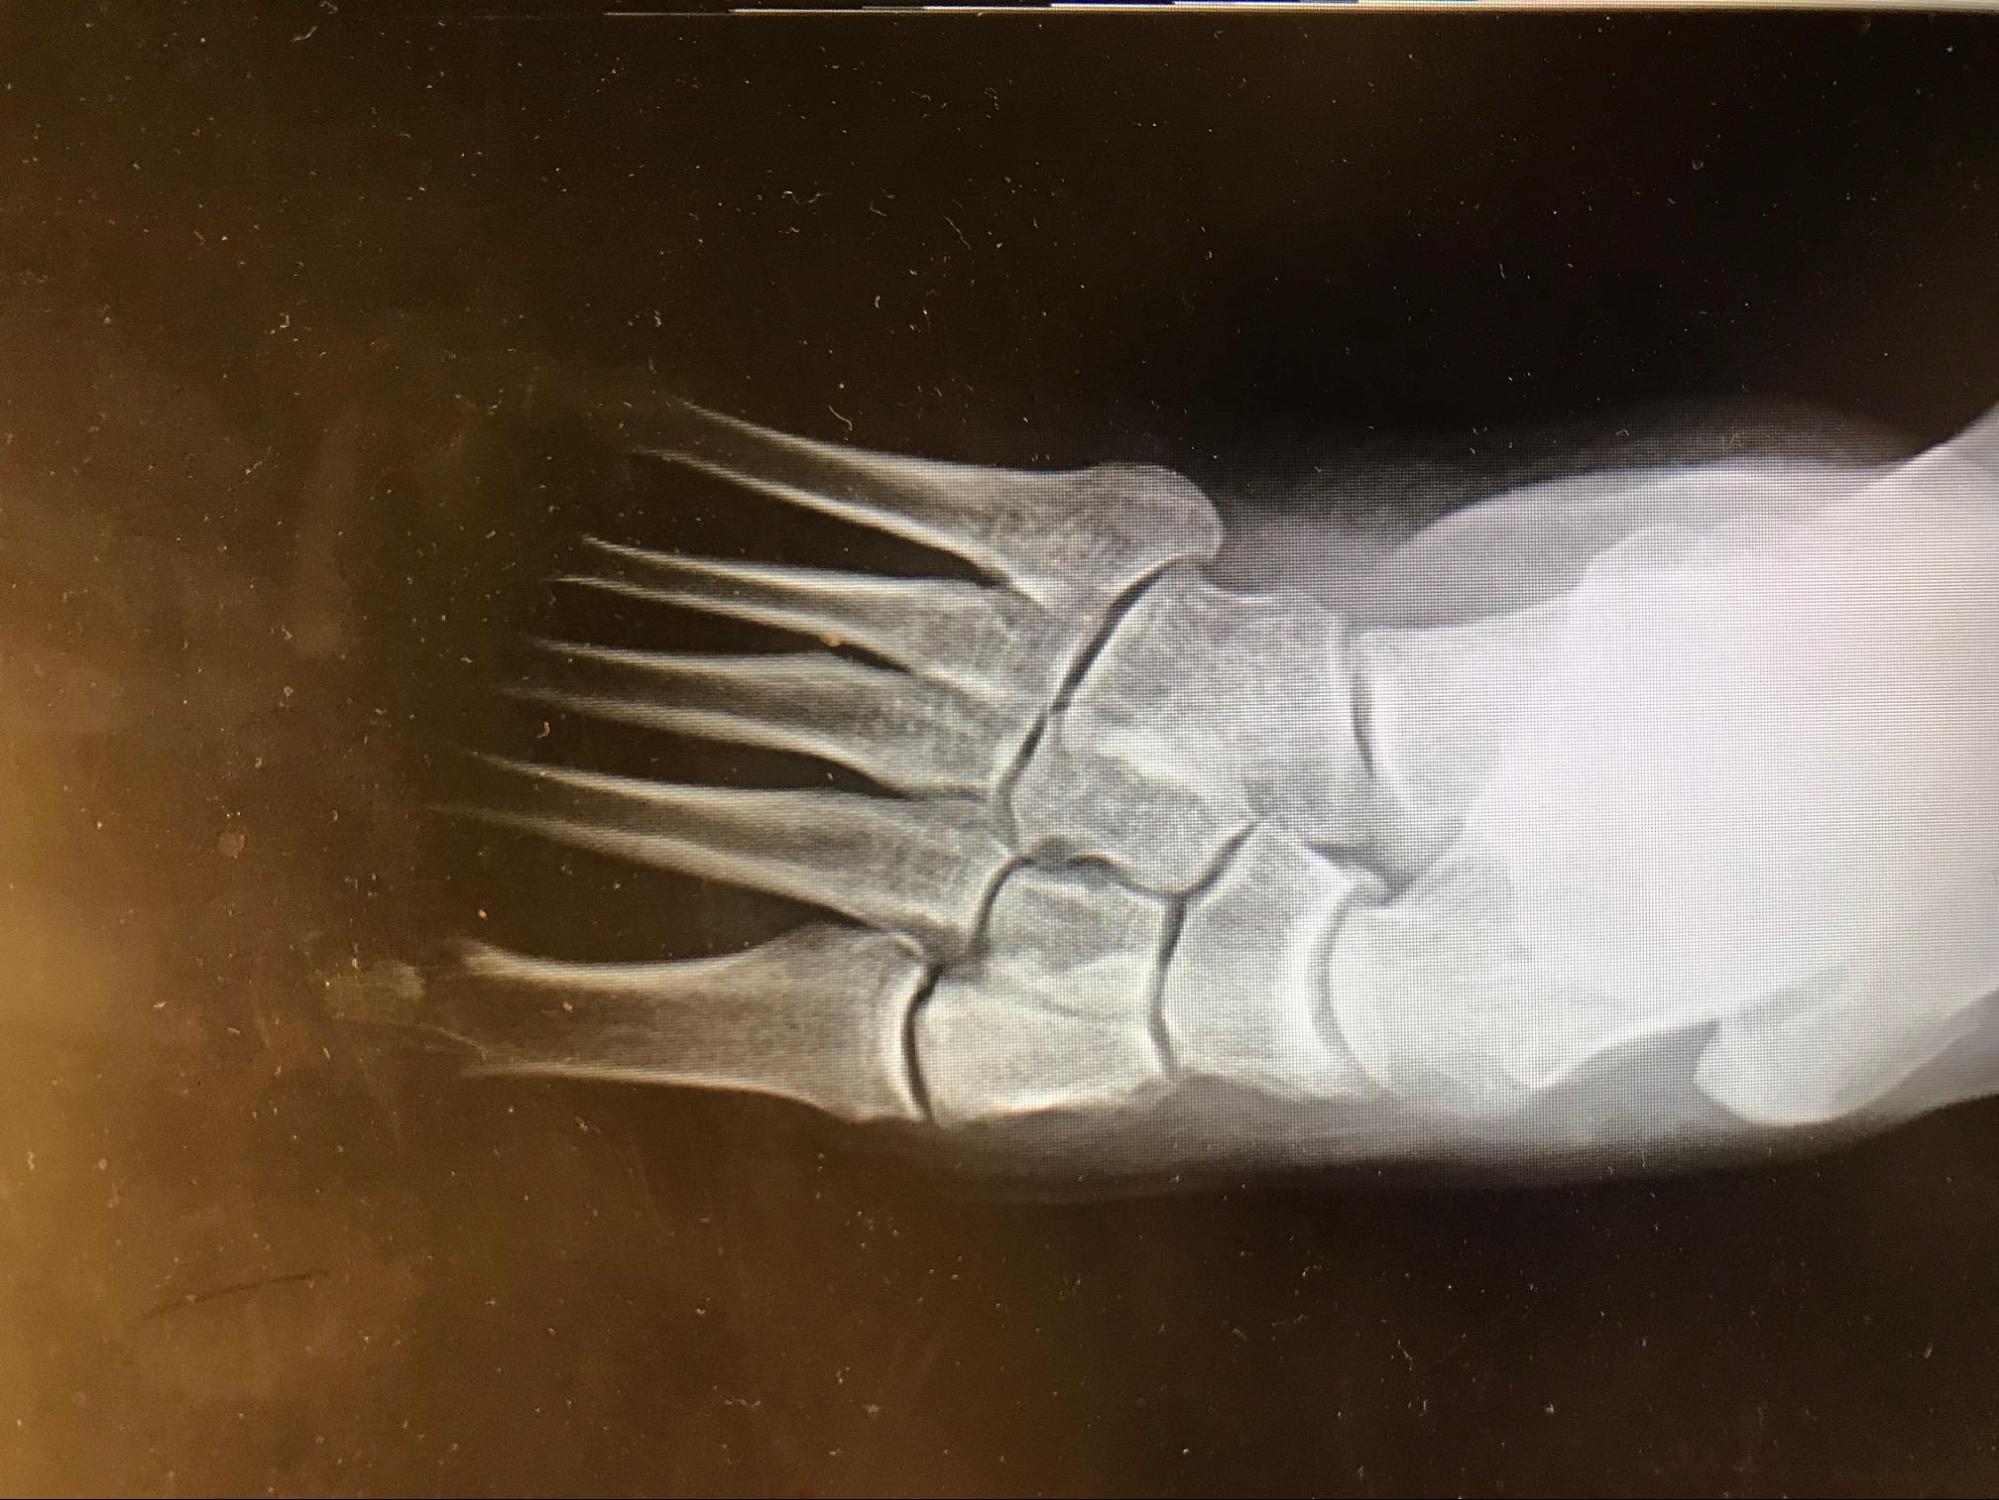 Adult Acquired Flatfoot
Radiograph demonstrating AAFD with increased talar head uncoverage and forefoot abduction.